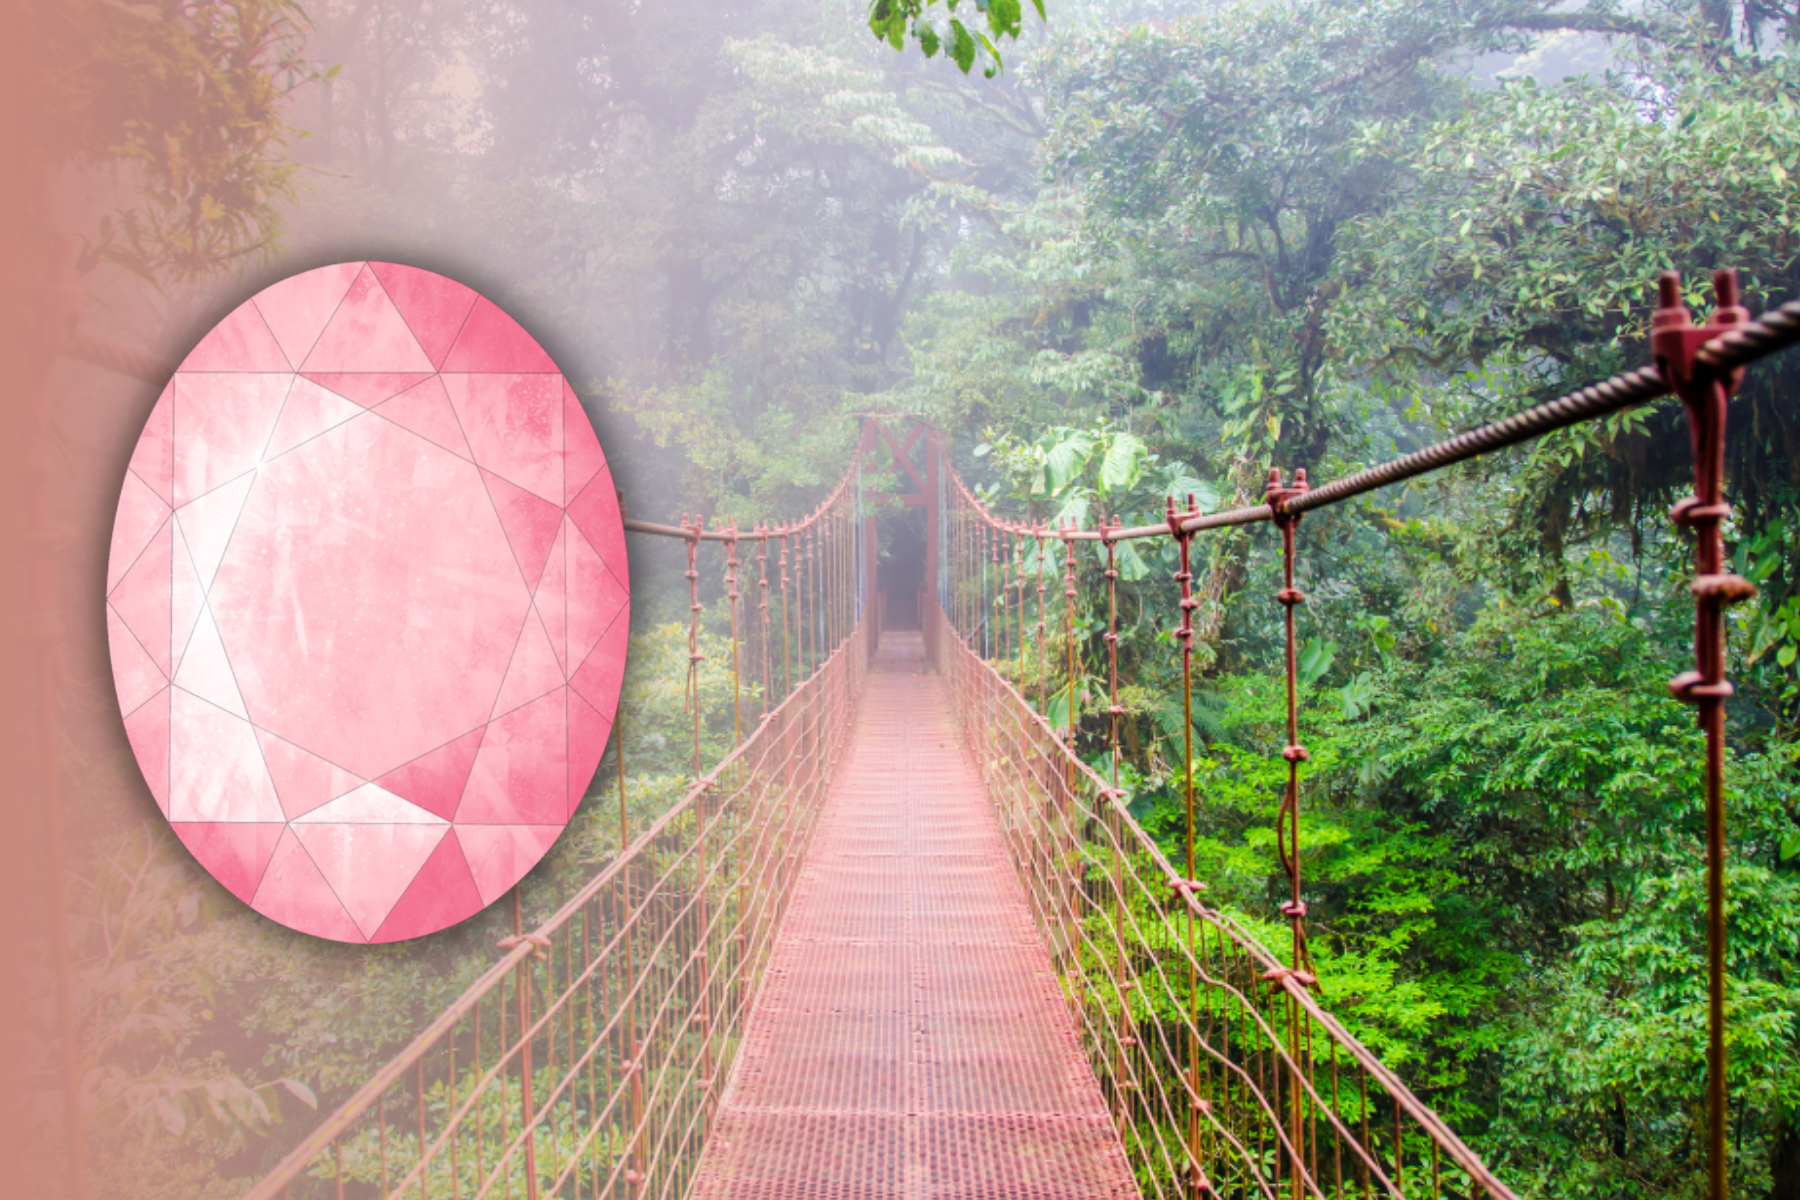 A wooden bridge surrounded by trees, featuring a large pink gemstone at its center